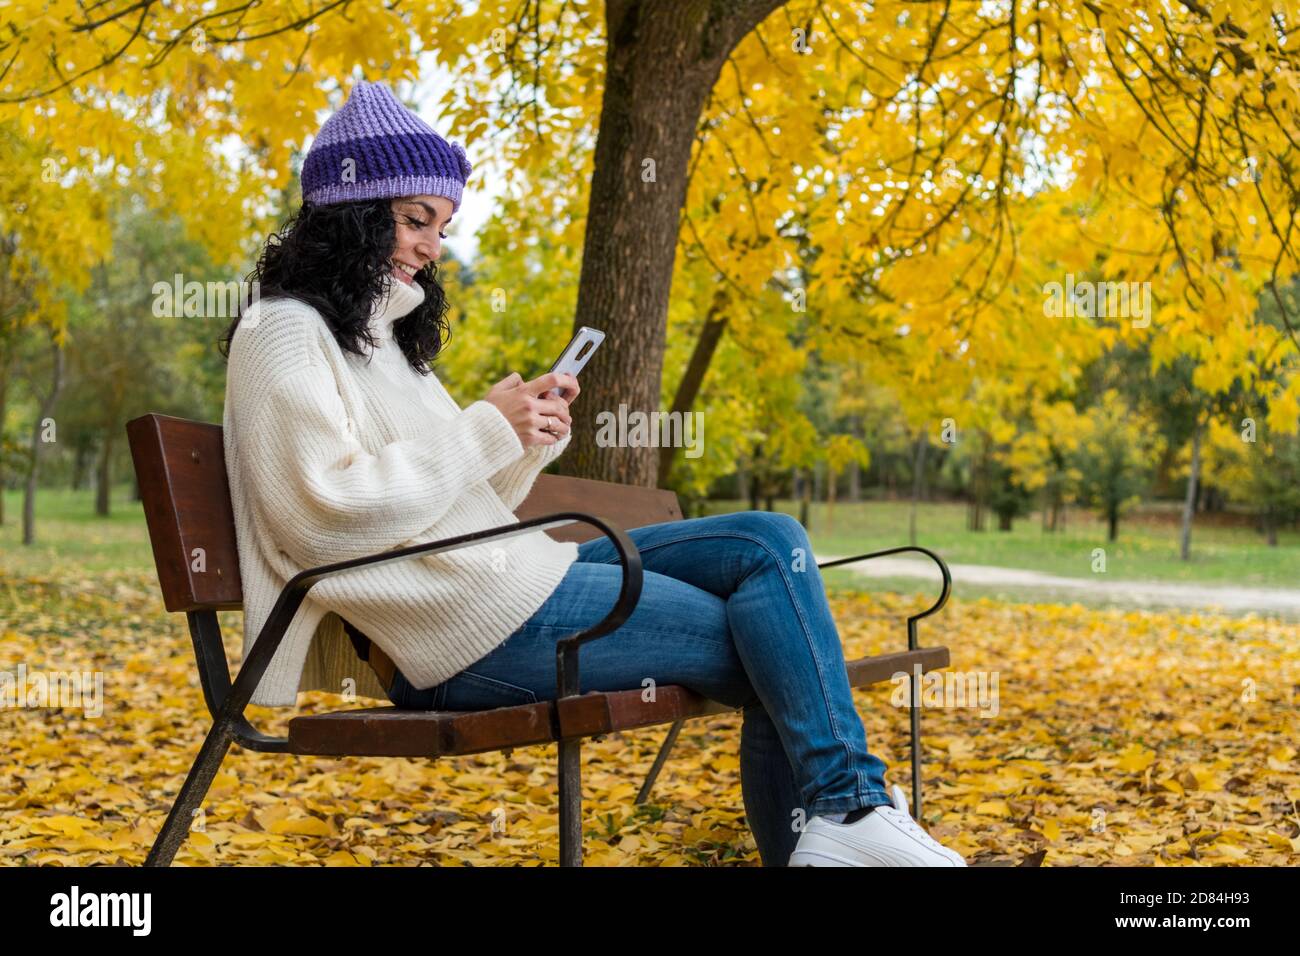 young woman with curly black hair and warm in sweater and wool hat sitting on a wooden bench in a park in autumn with leaves of the trees falling in t Stock Photo